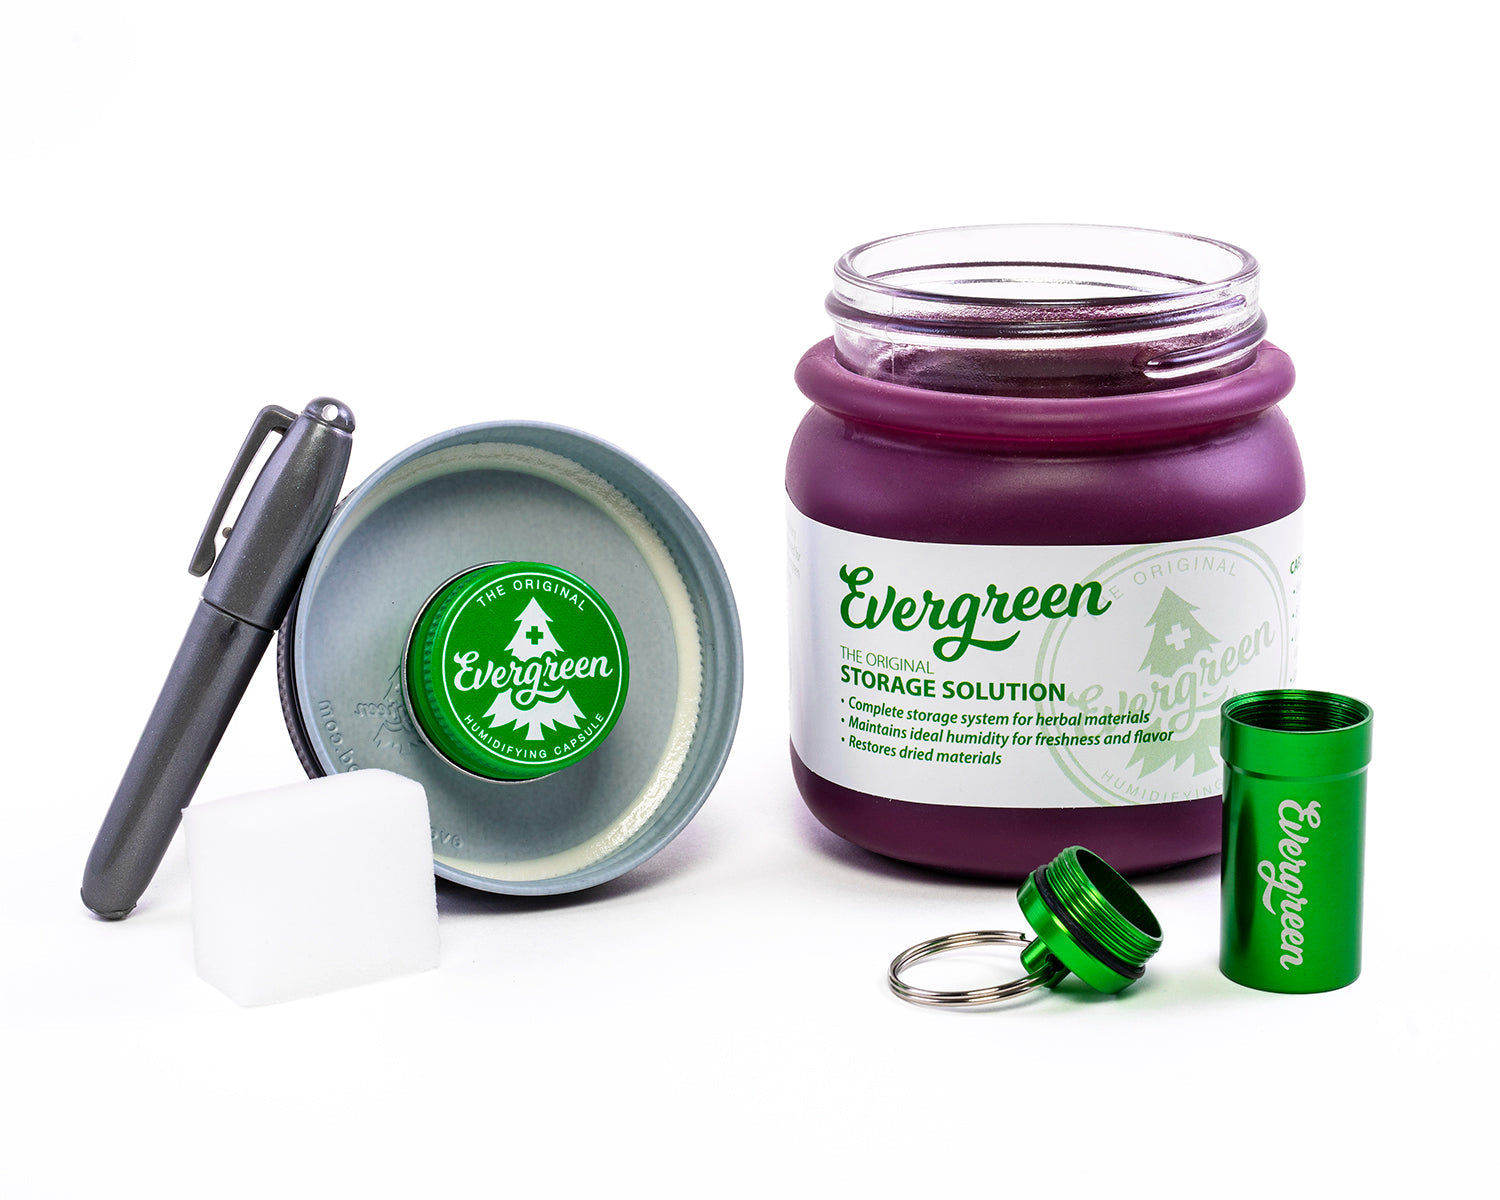 Evergreen Storage Solution open showing contents purple